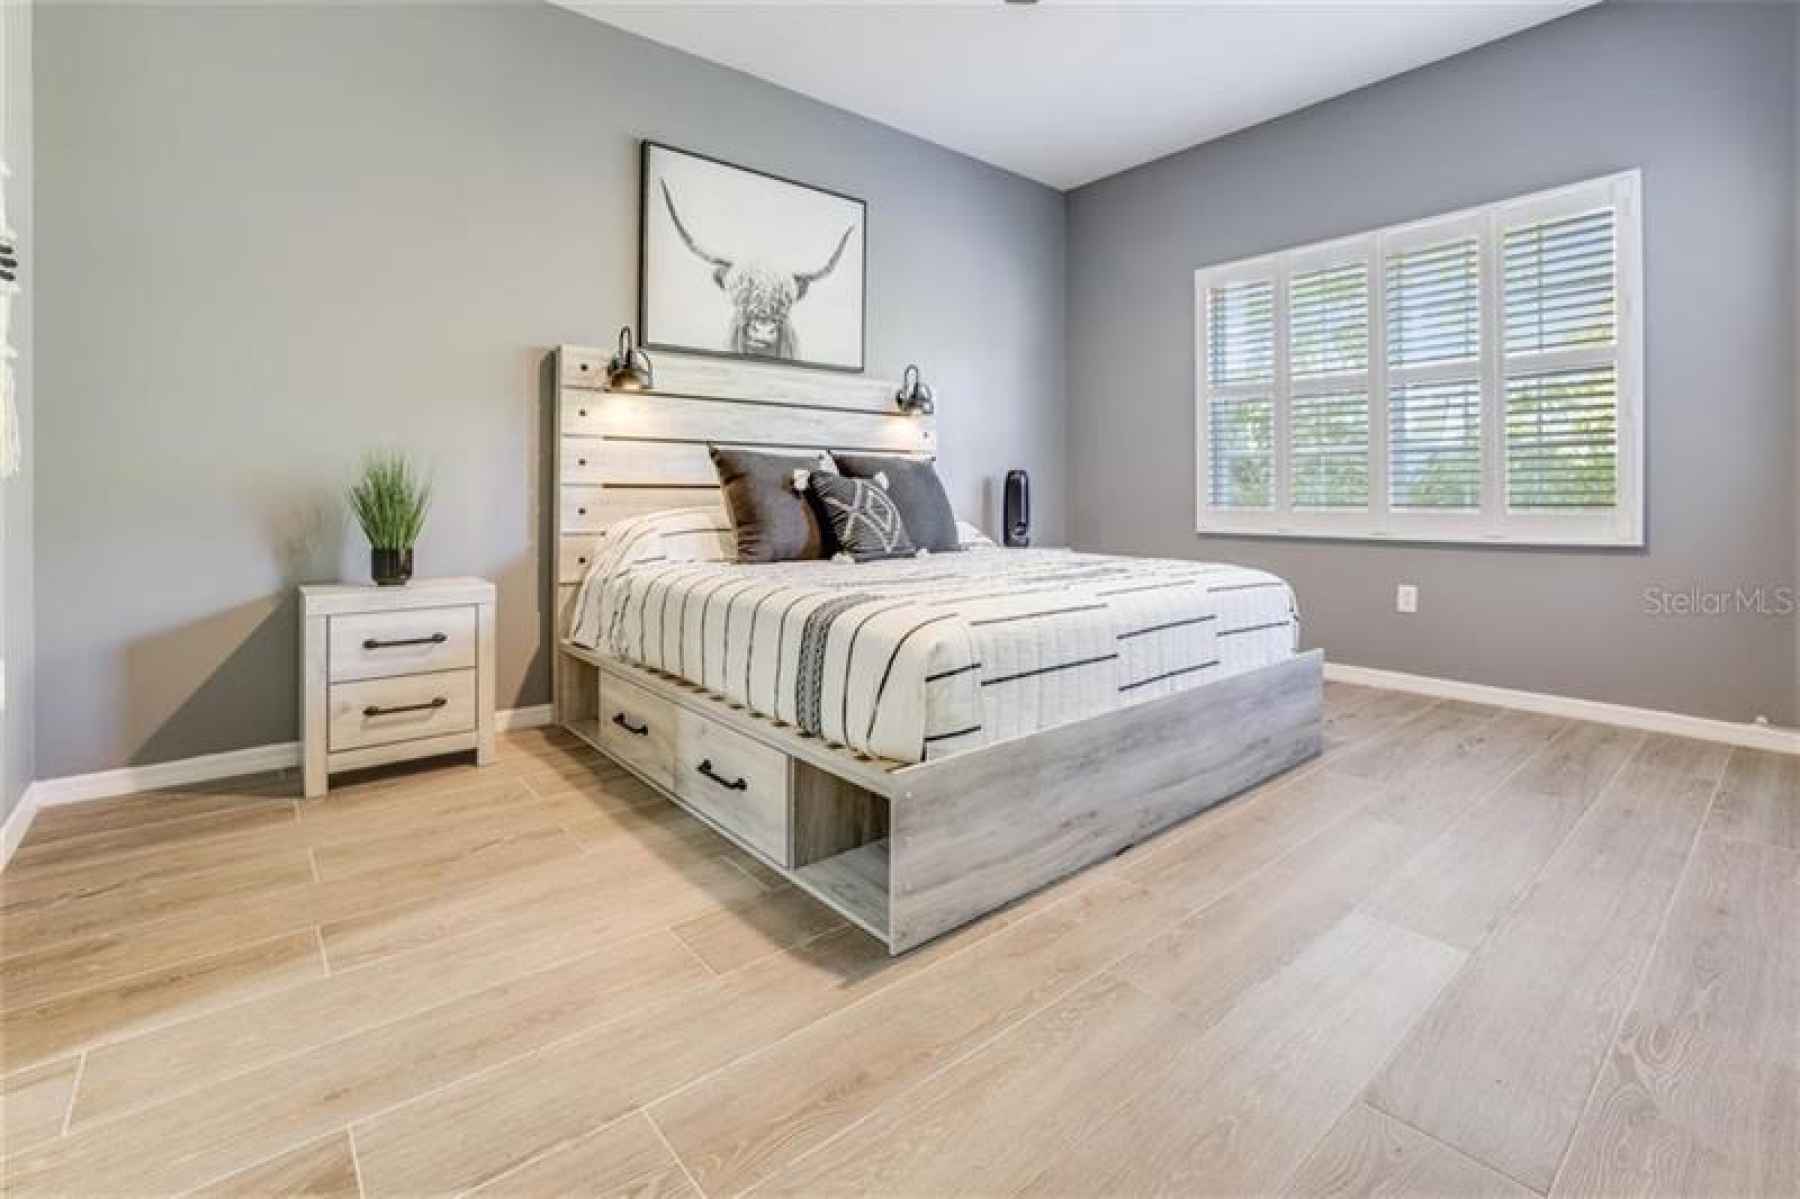 Master Bedroom- Extra storage under bed, window looks out to green space and pond